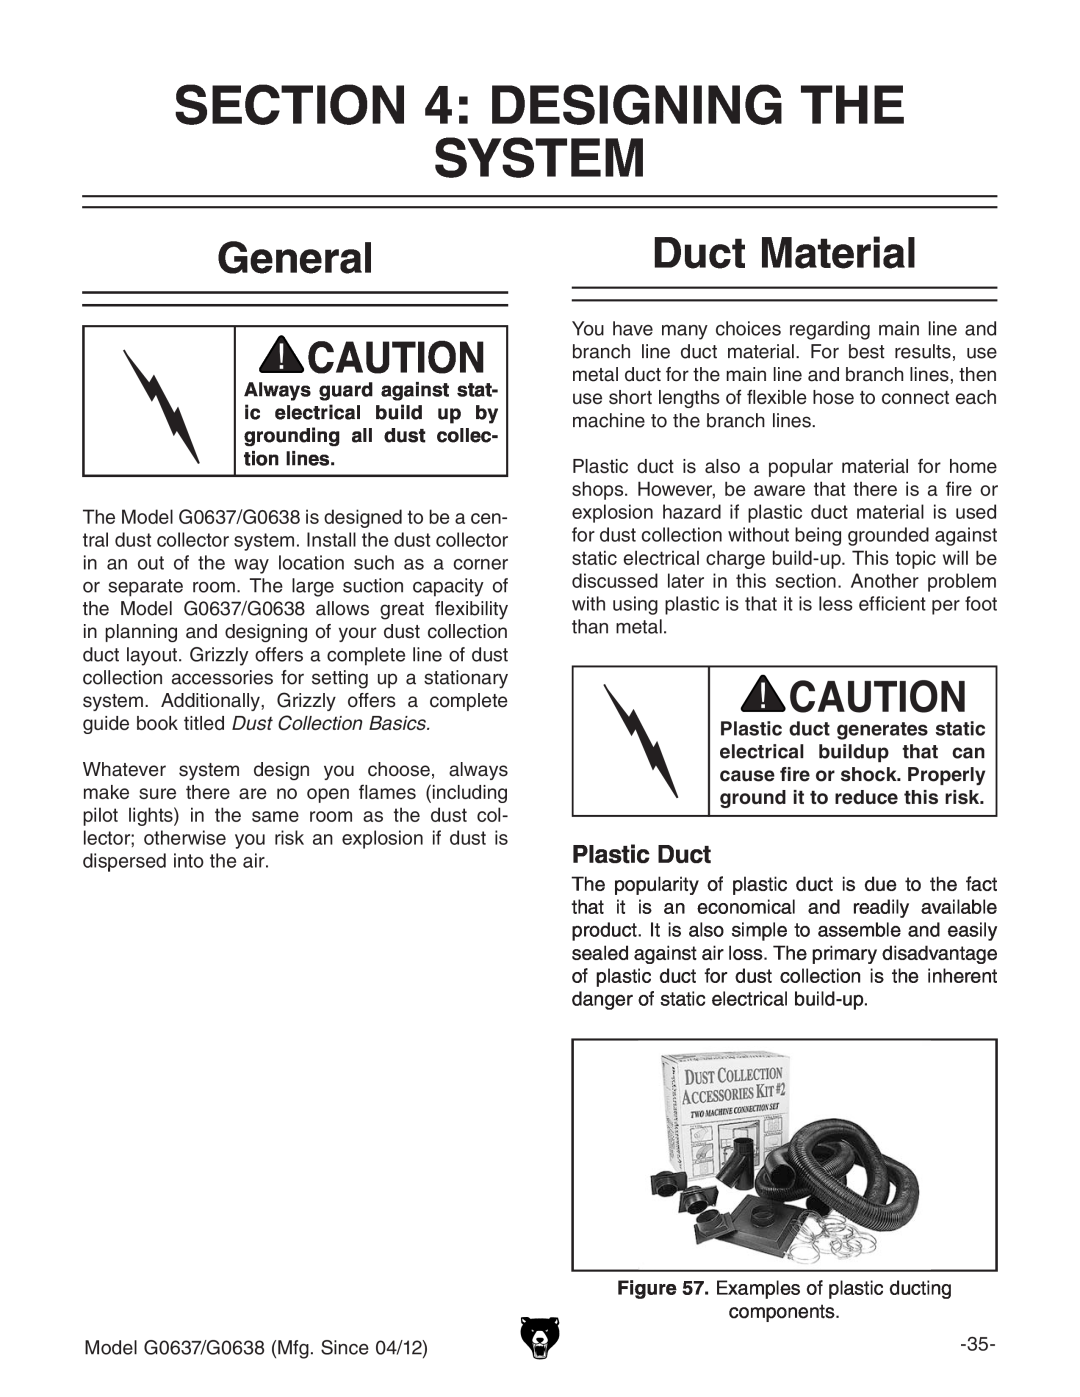 Grizzly G0637 owner manual Designing The System, General, Duct Material, Plastic Duct 